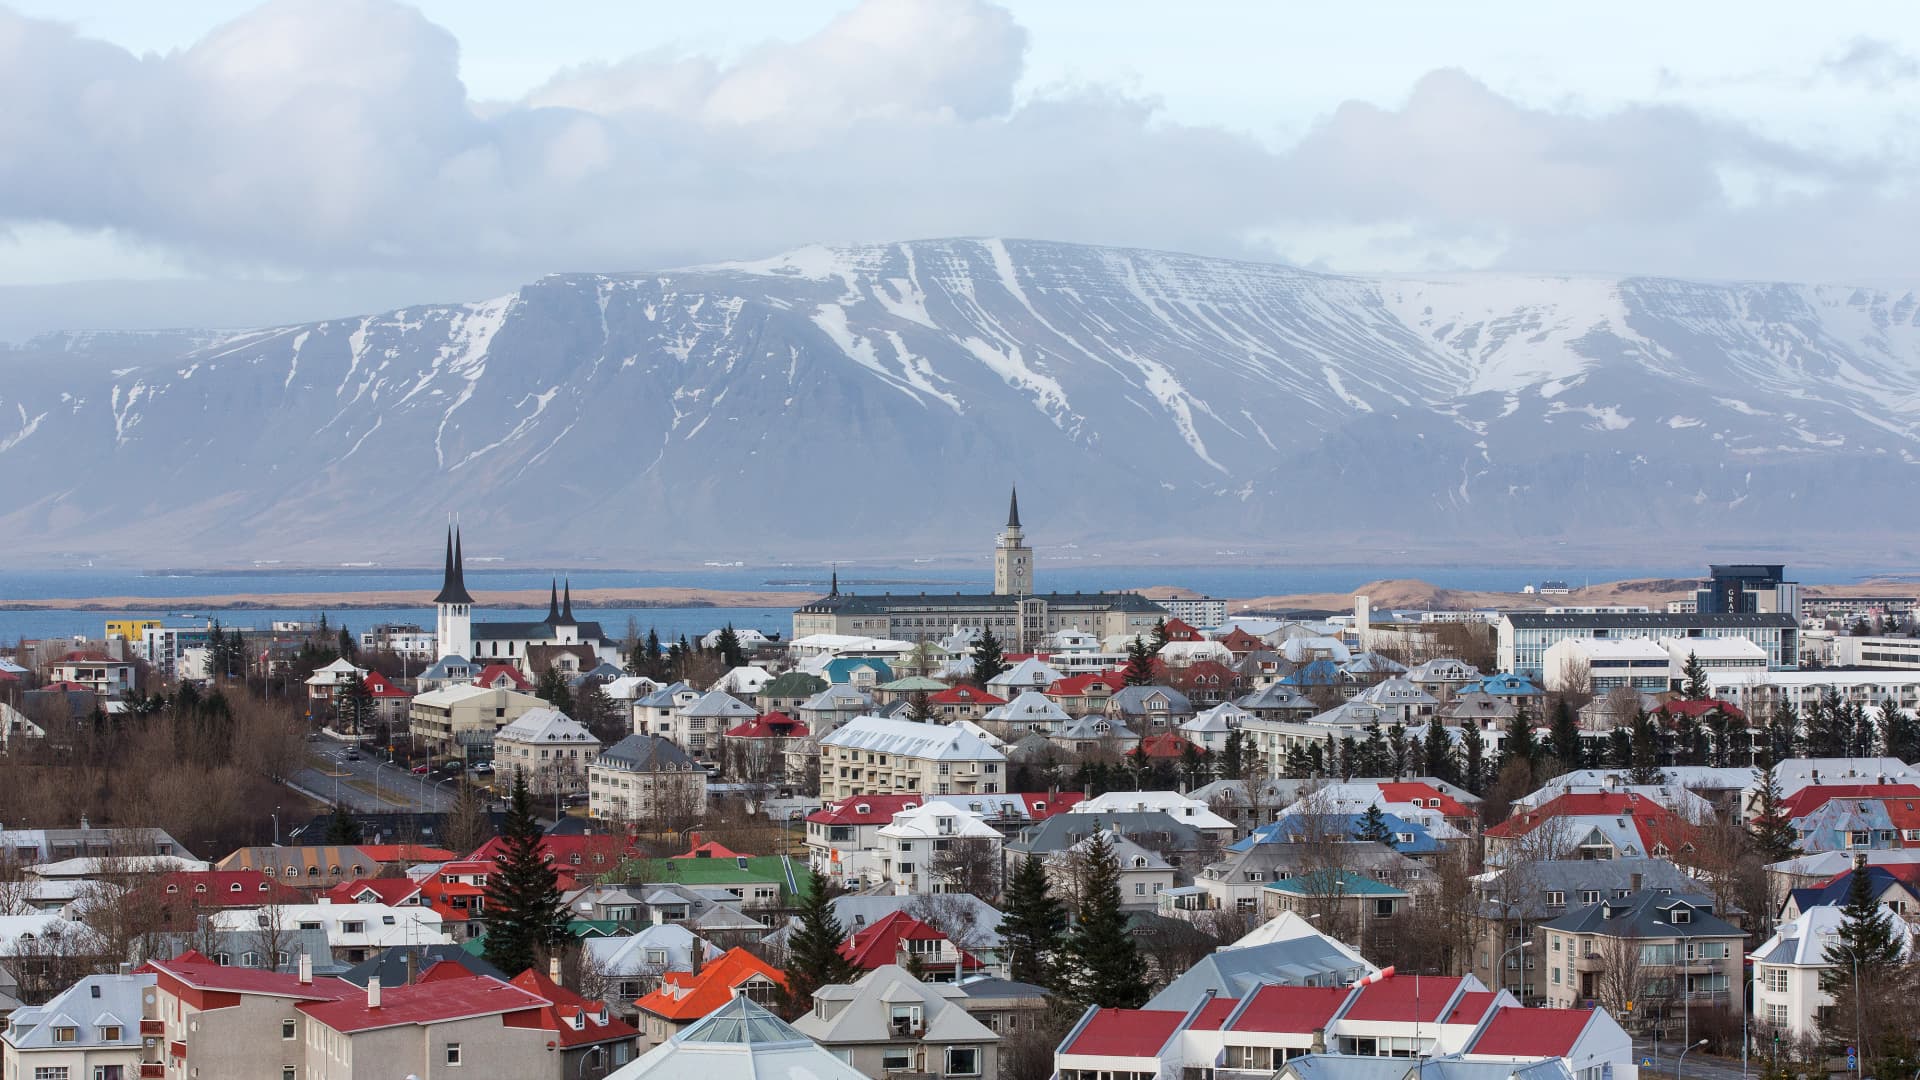 Residential properties stand on the city skyline in Reykjavik, Iceland.